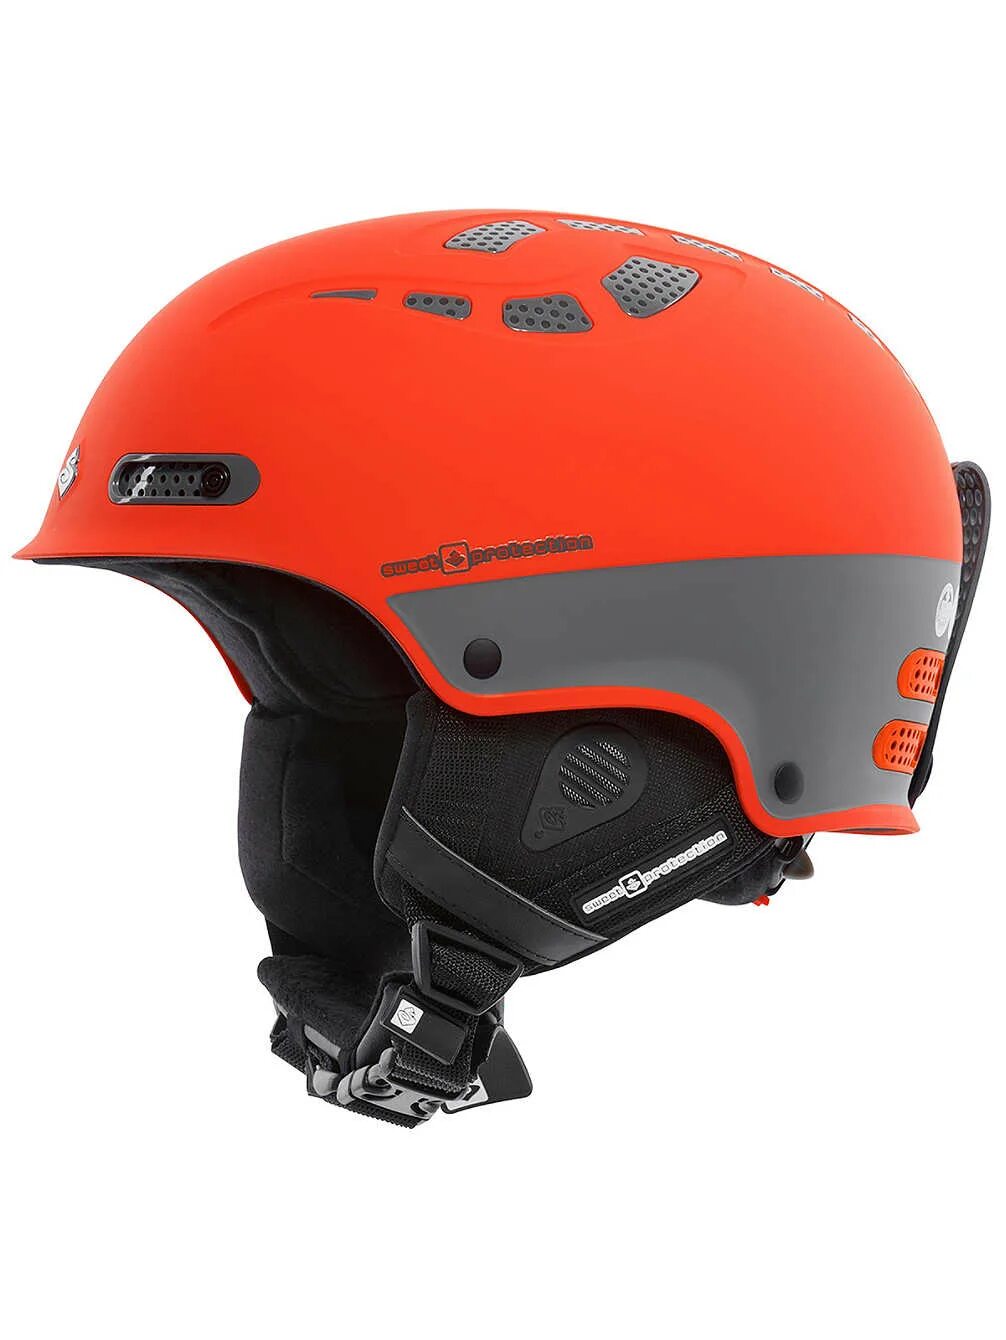 Sweet Protection шлемы горнолыжные. Шлем Sweet Protection Igniter II Helmet. Denton шлем горнолыжный. Горнолыжный шлем Atomic 53-56. Купить горнолыжный шлем в москве